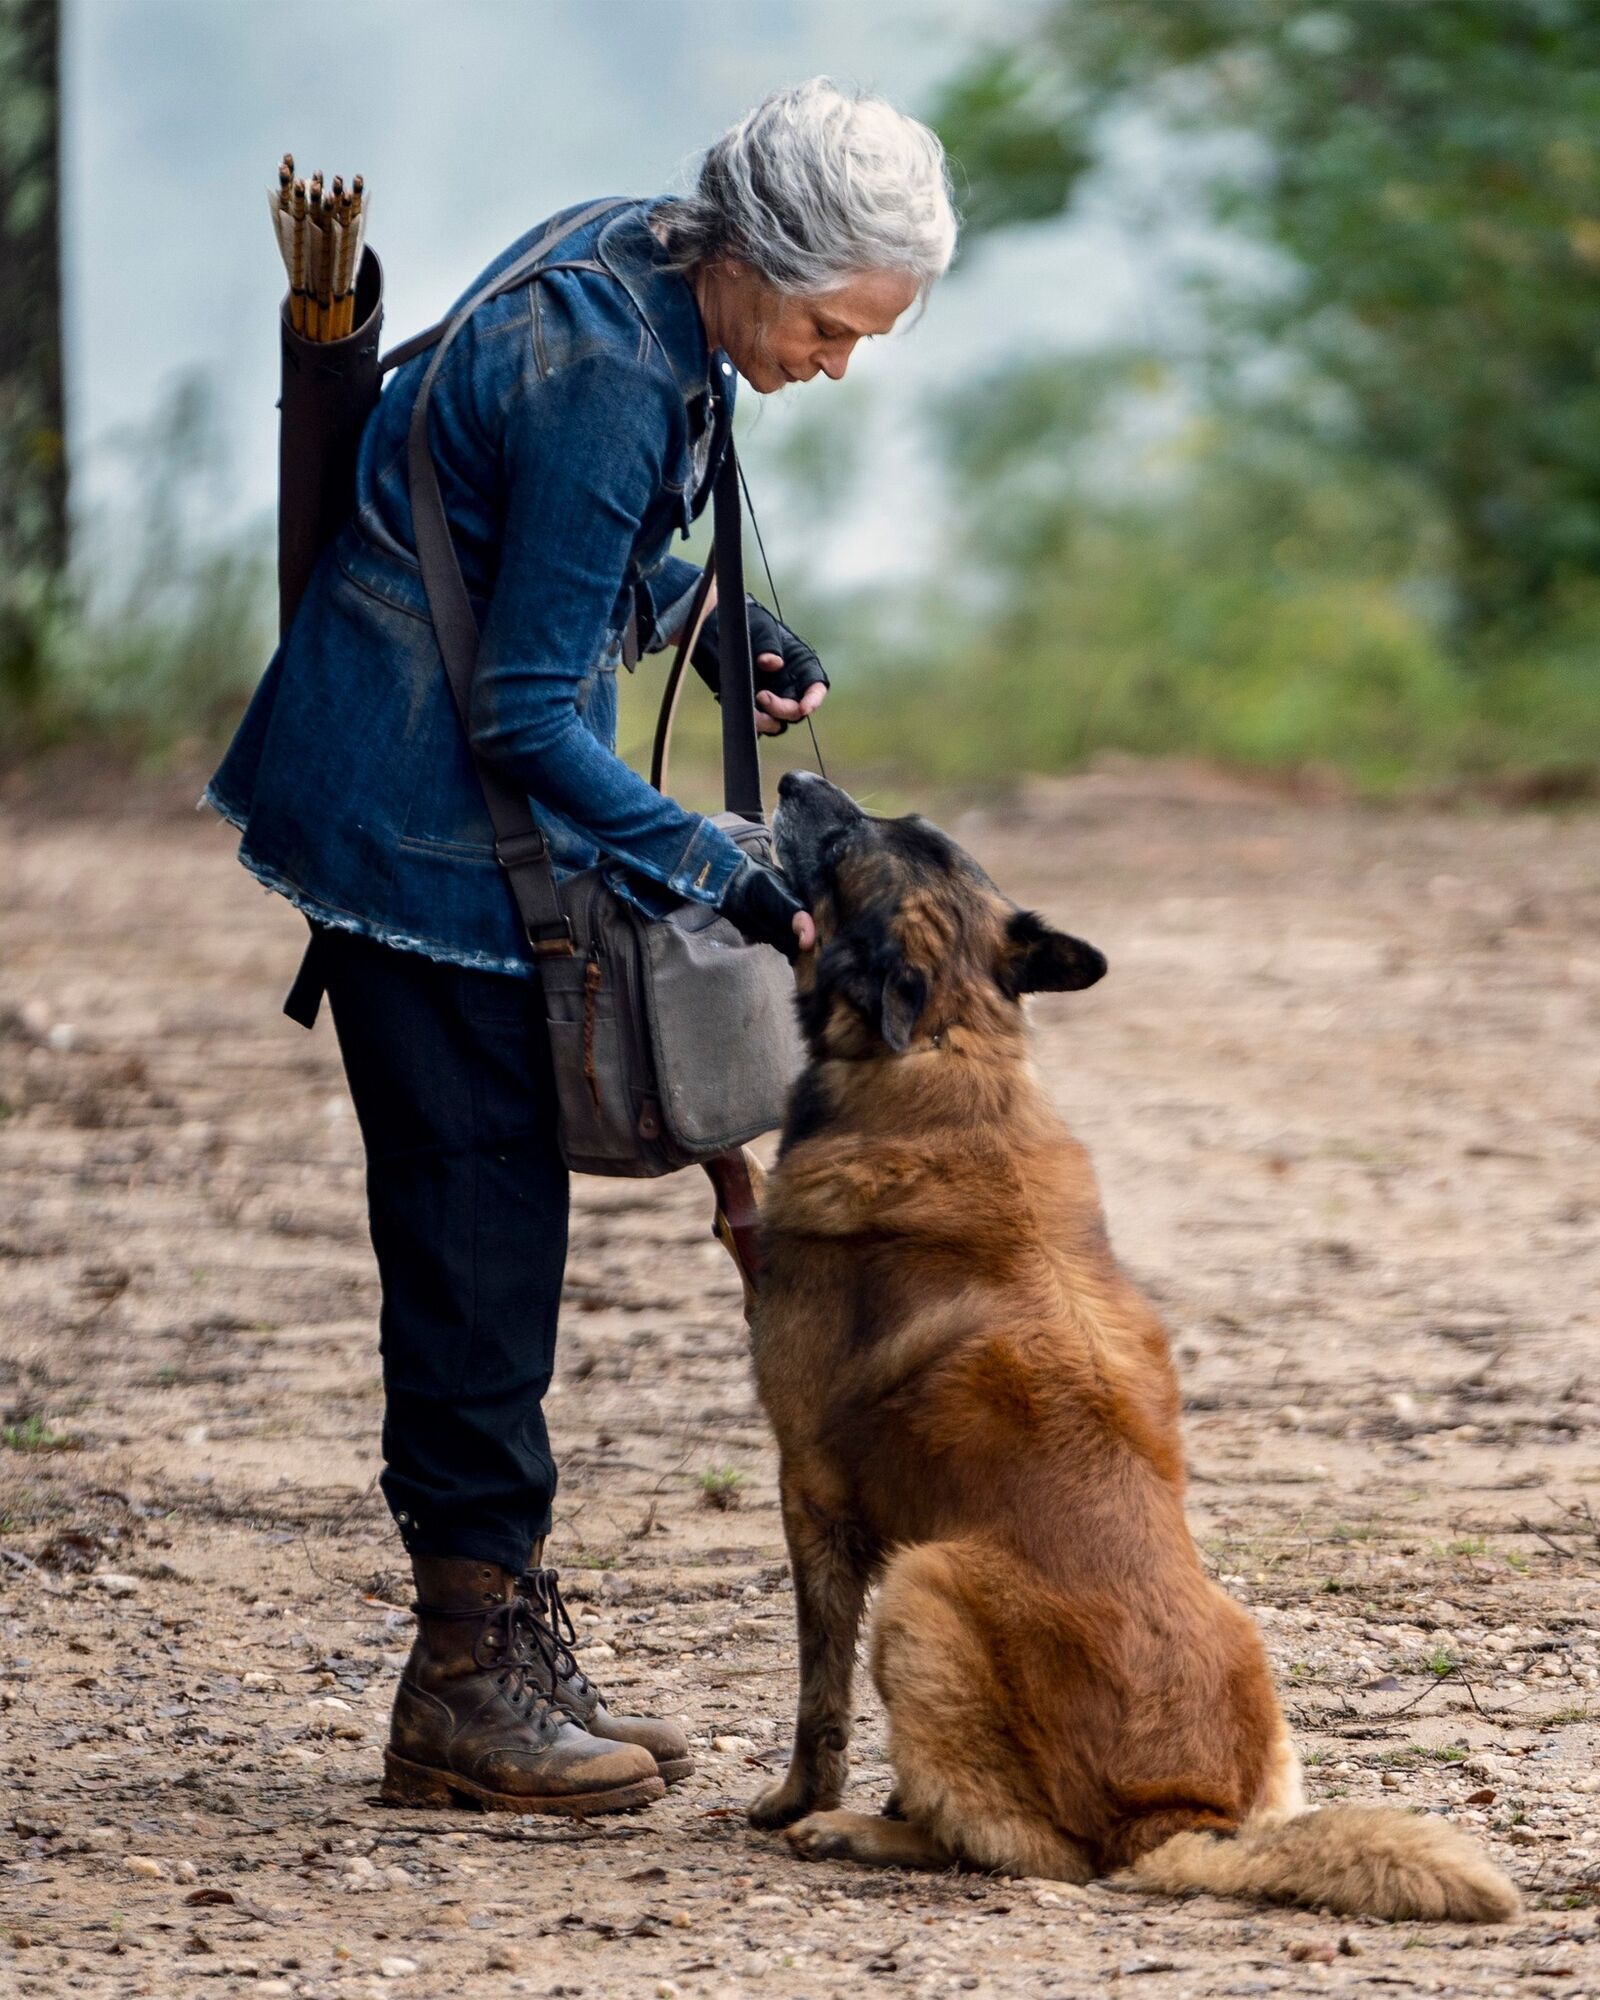 Daryl's dog from The Walking Dead dies: actor shows cute photos with his pet